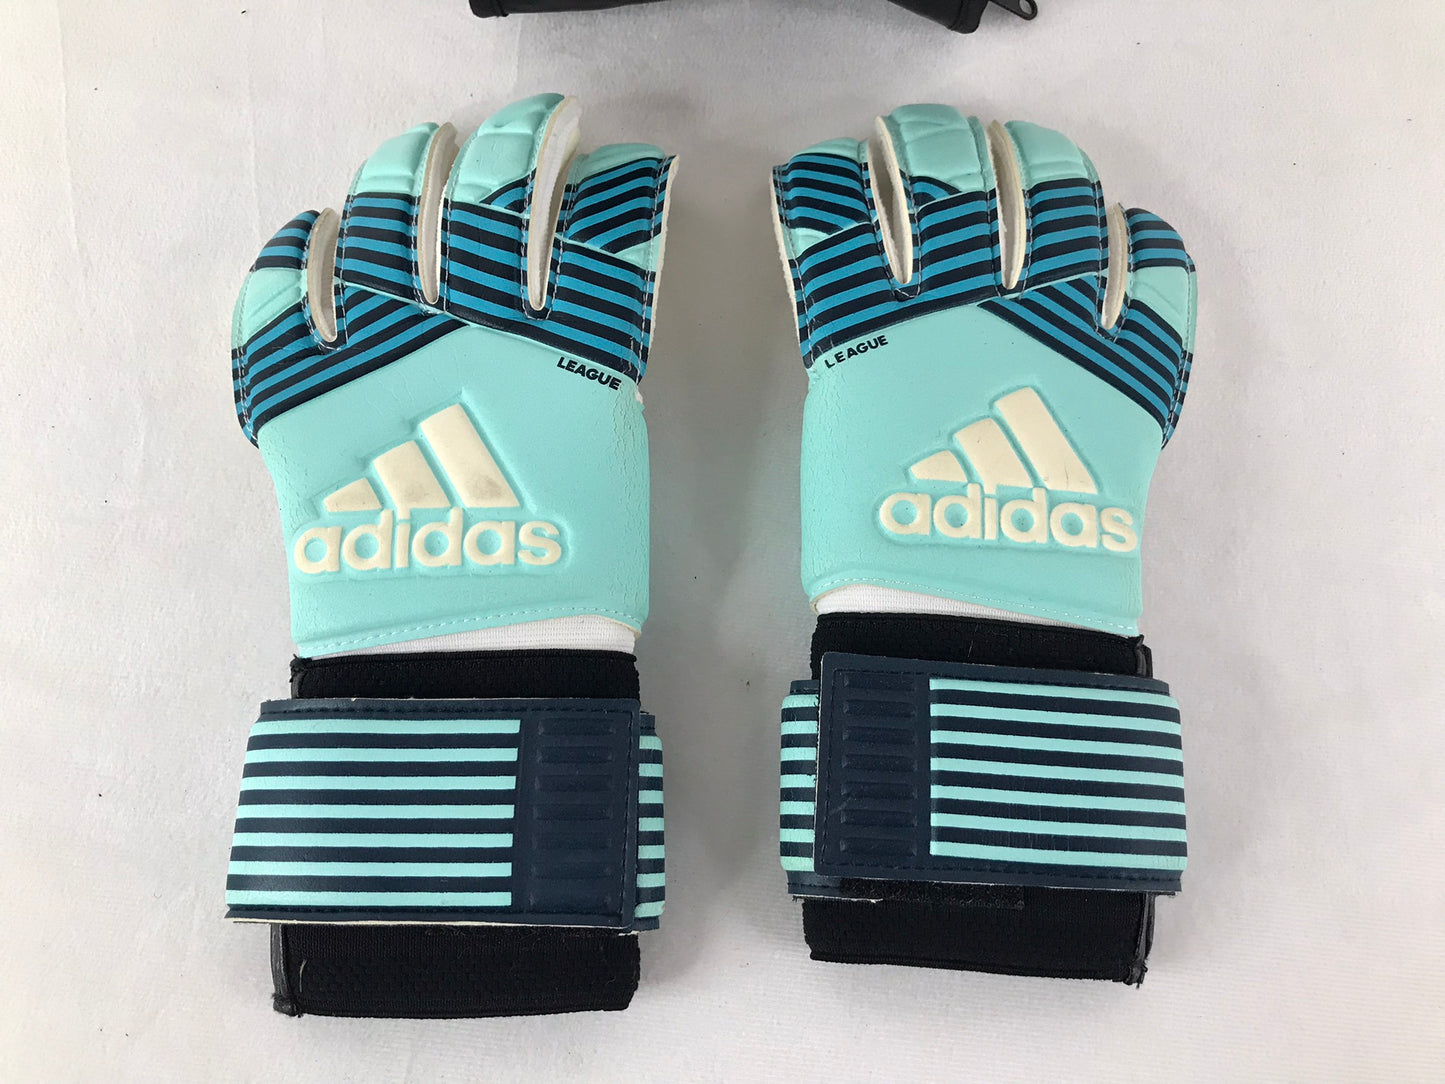 Soccer Goalie Gloves Child Size 5 Age 8-9 Adidas Ace Zone Pro Soccer Teal White New In Bag